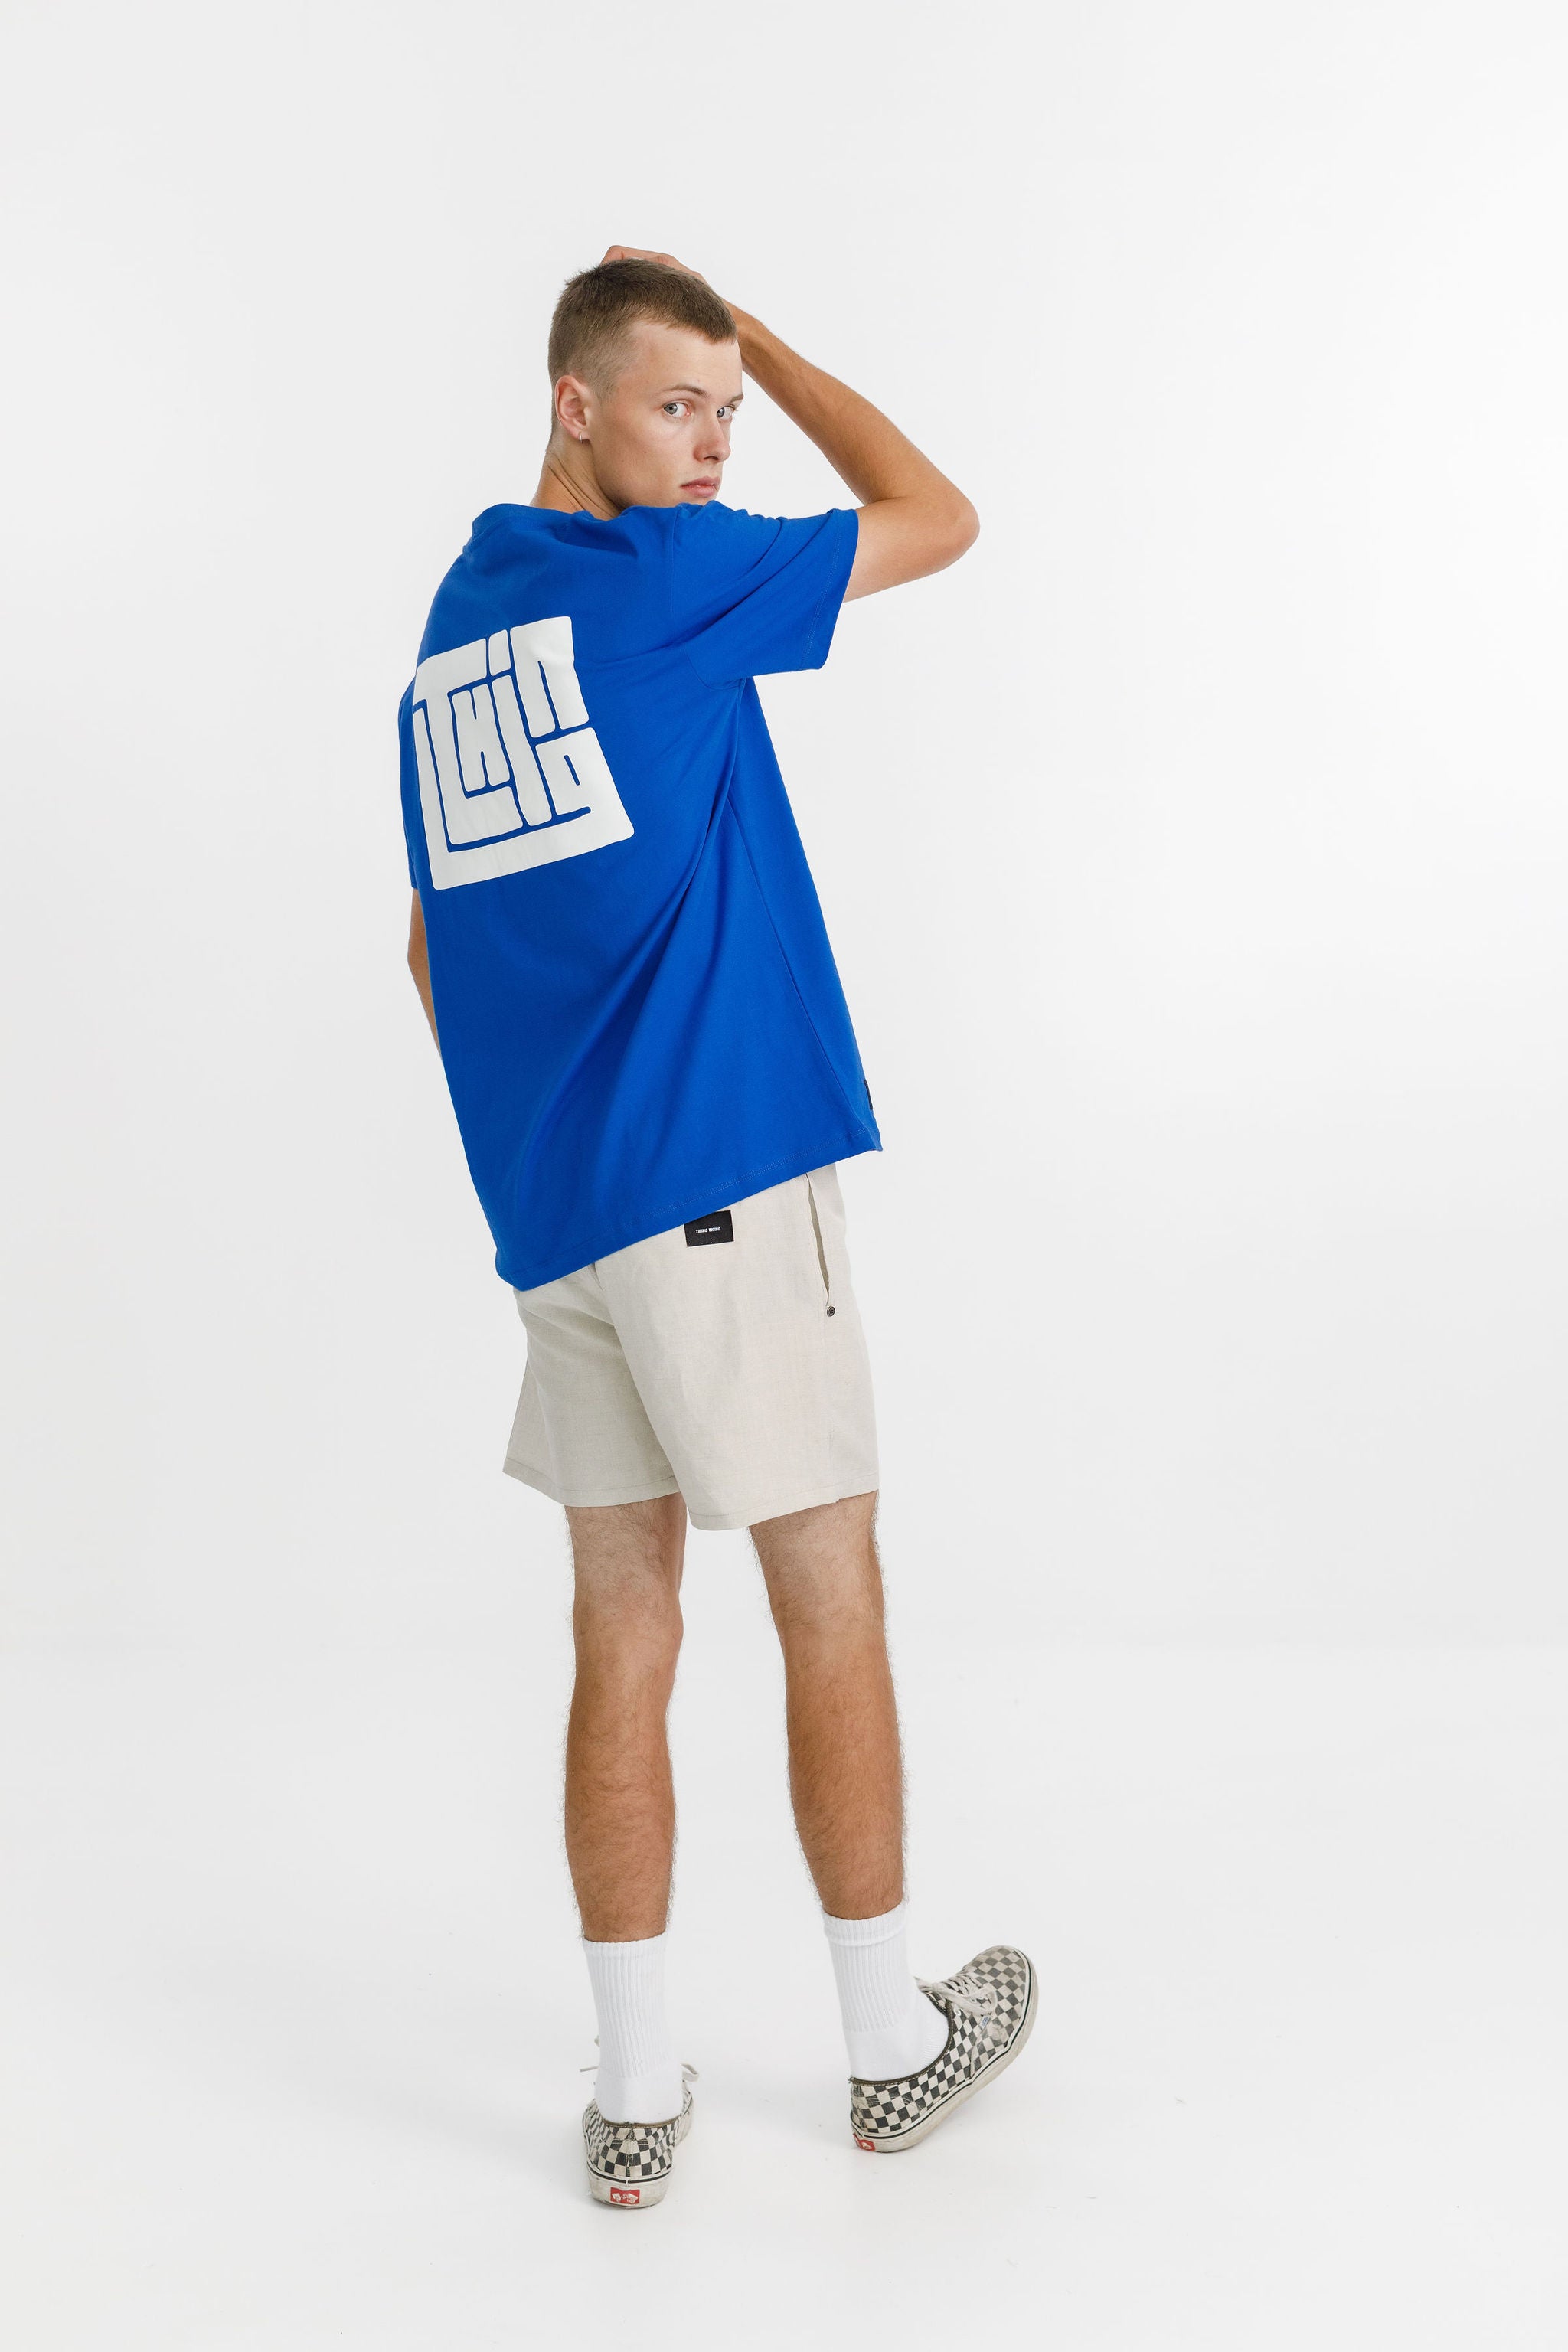 SS Tee - Sale - Royal with White Block Print